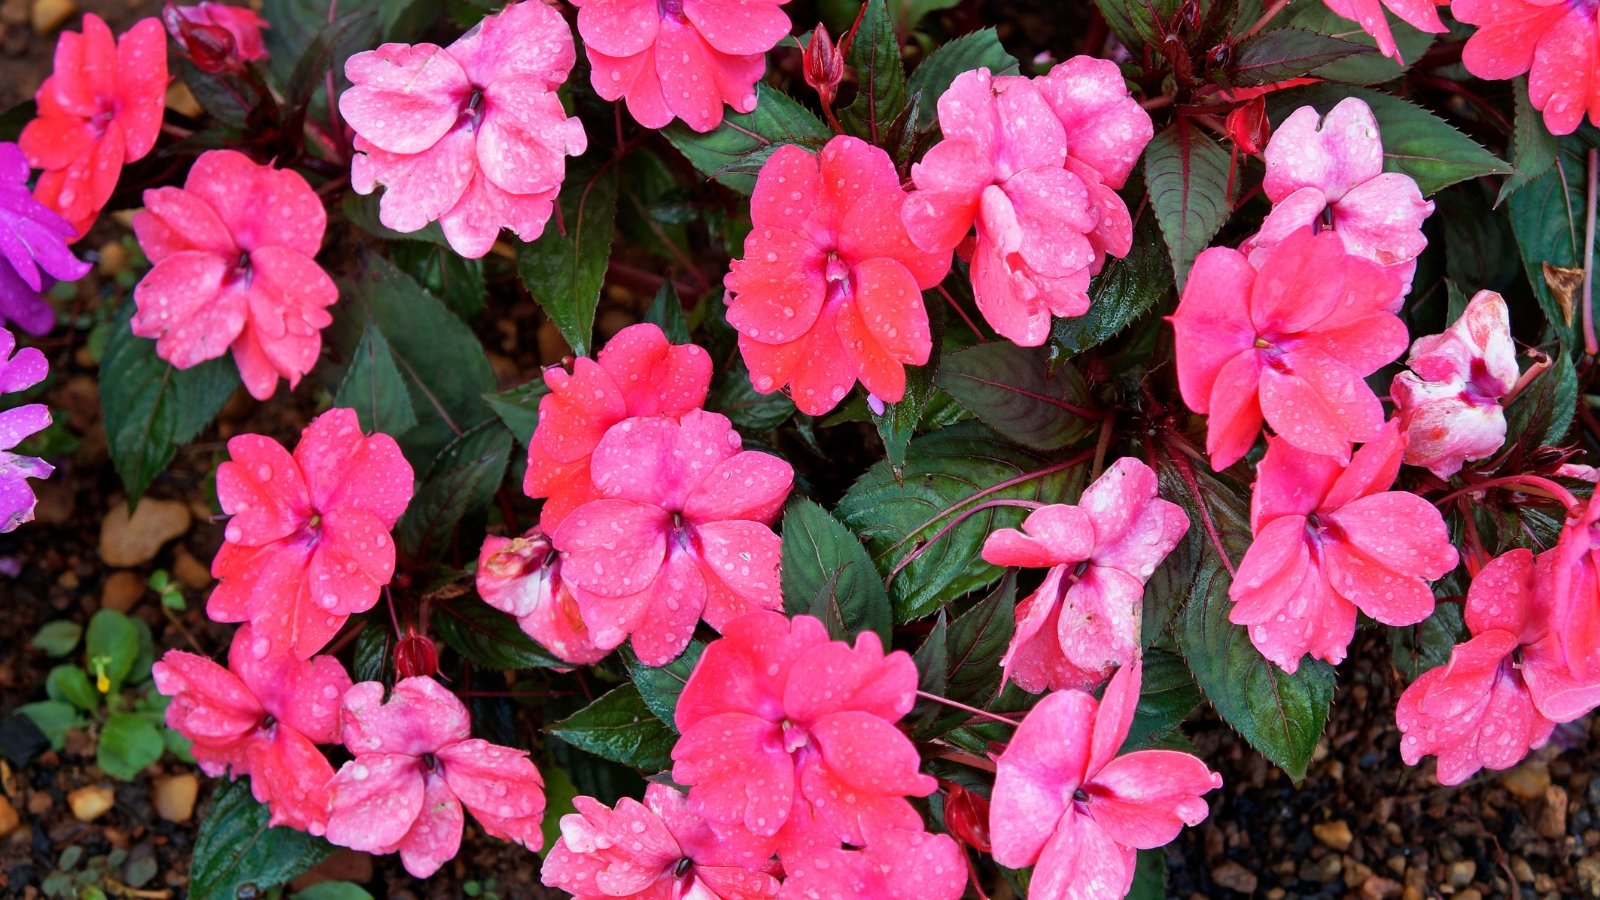 Impatiens present succulent stems and serrated leaves, adorned with clusters of small, pink flowers covered with drops of water.